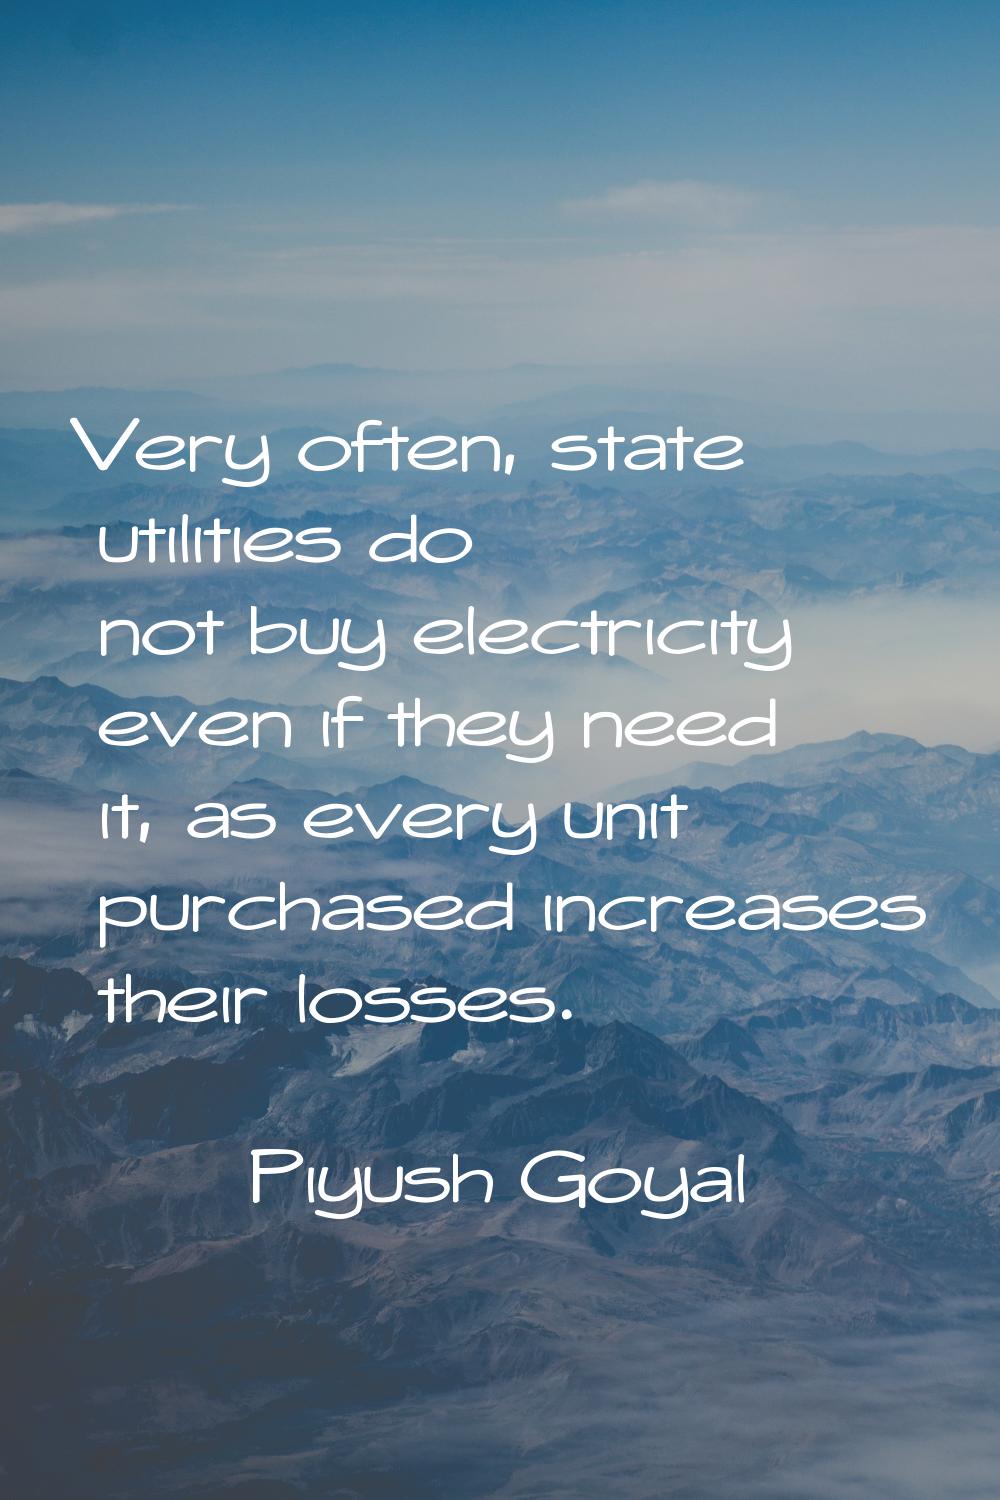 Very often, state utilities do not buy electricity even if they need it, as every unit purchased in